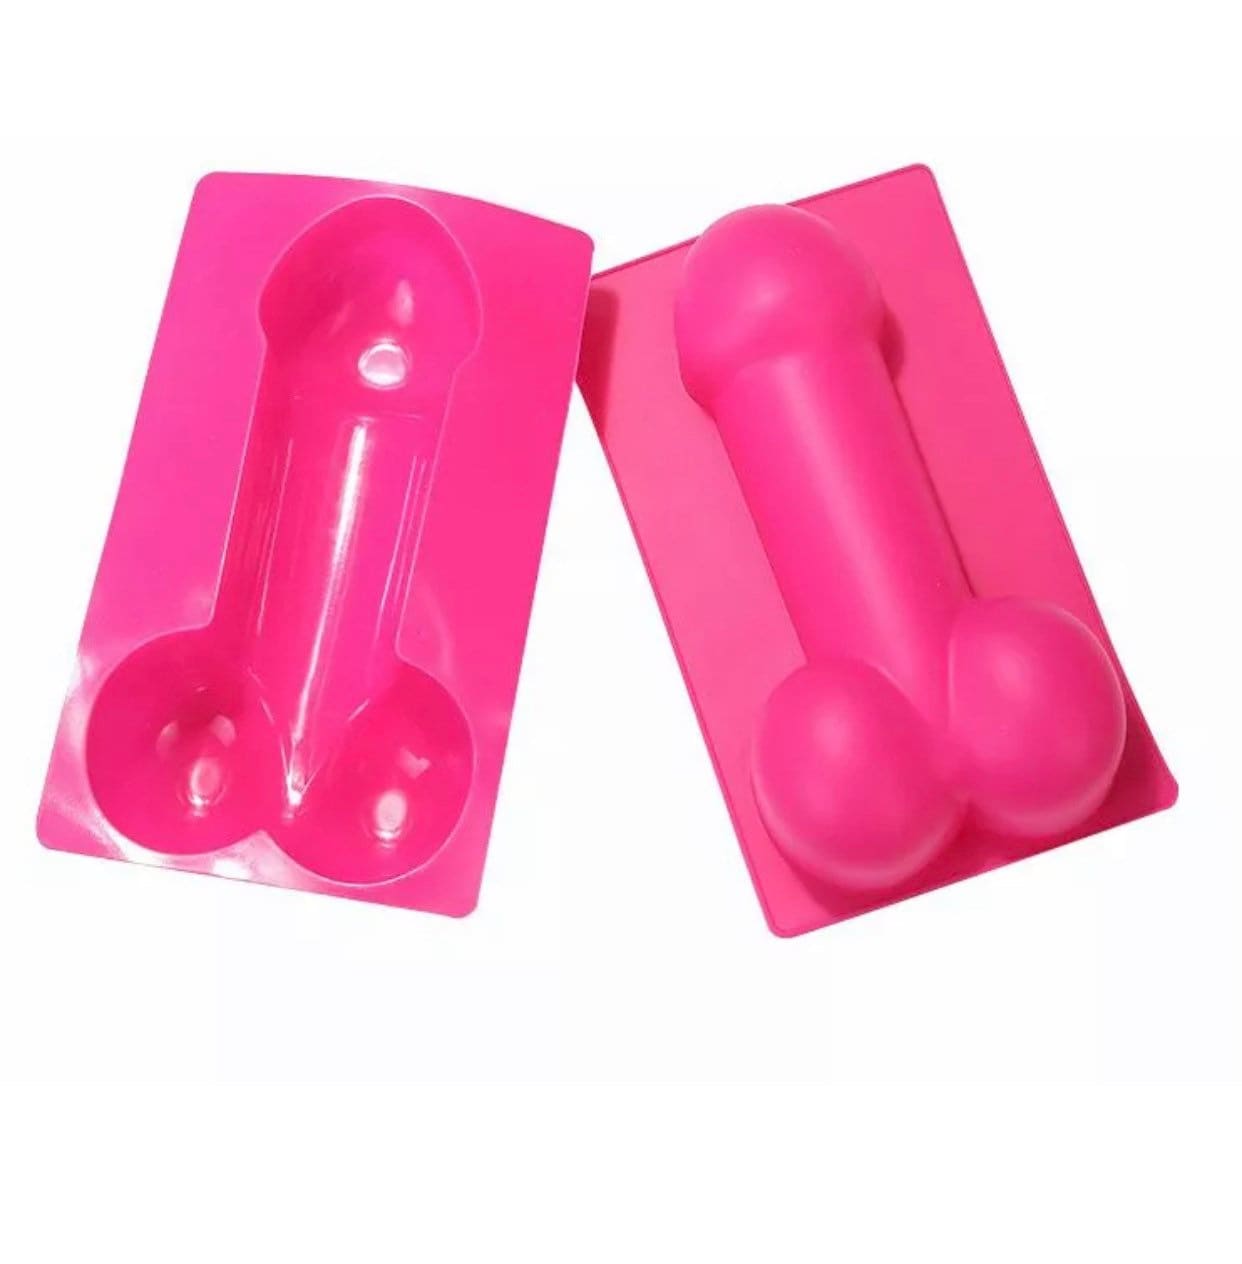 NEW Silicone Penis Dick Mold Candy Ice Cube Tray Chocolate DIY Soap